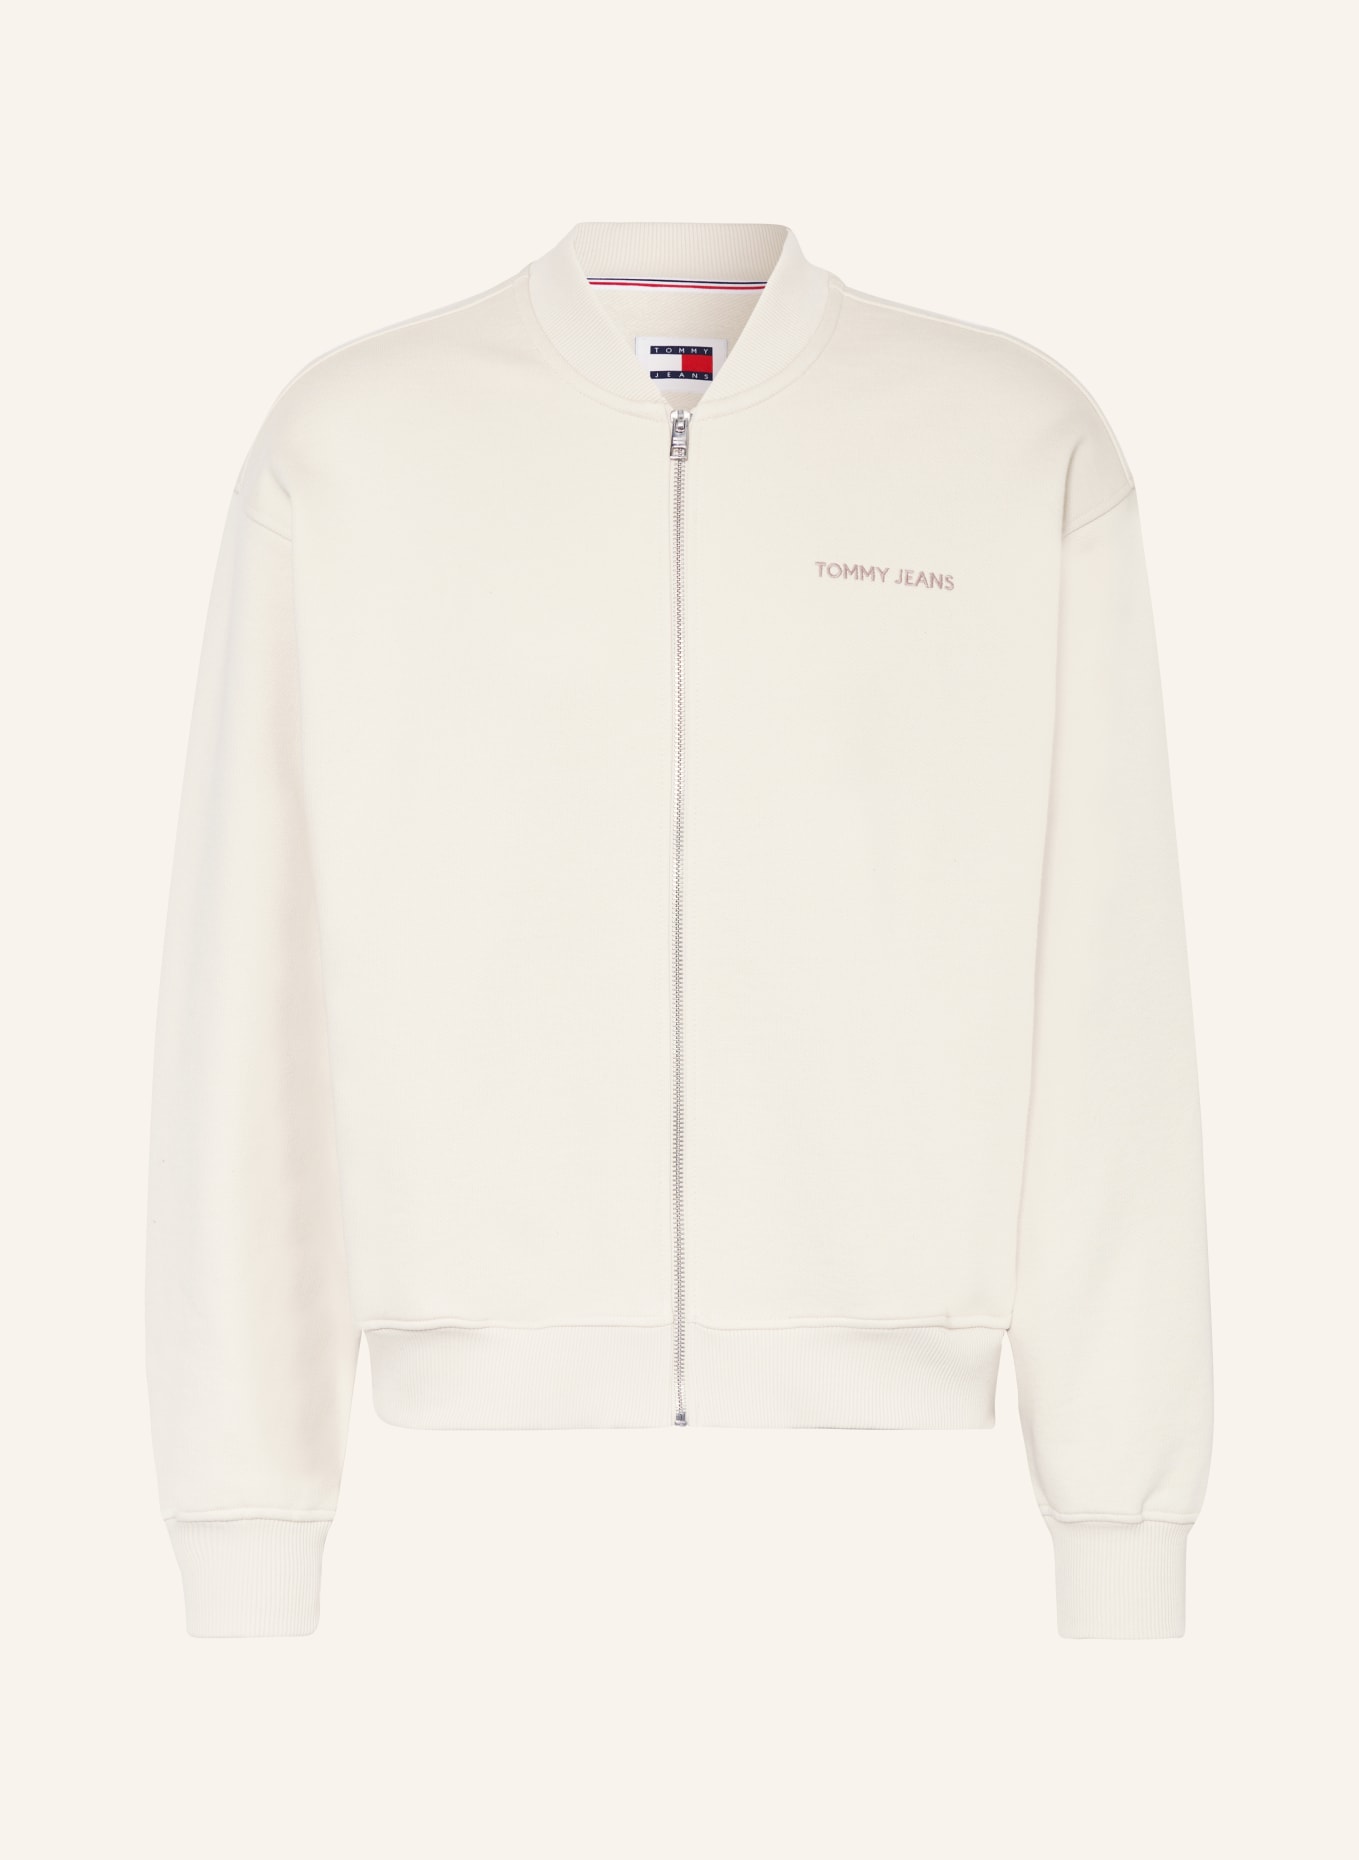 TOMMY JEANS Bomber jacket, Color: CREAM (Image 1)